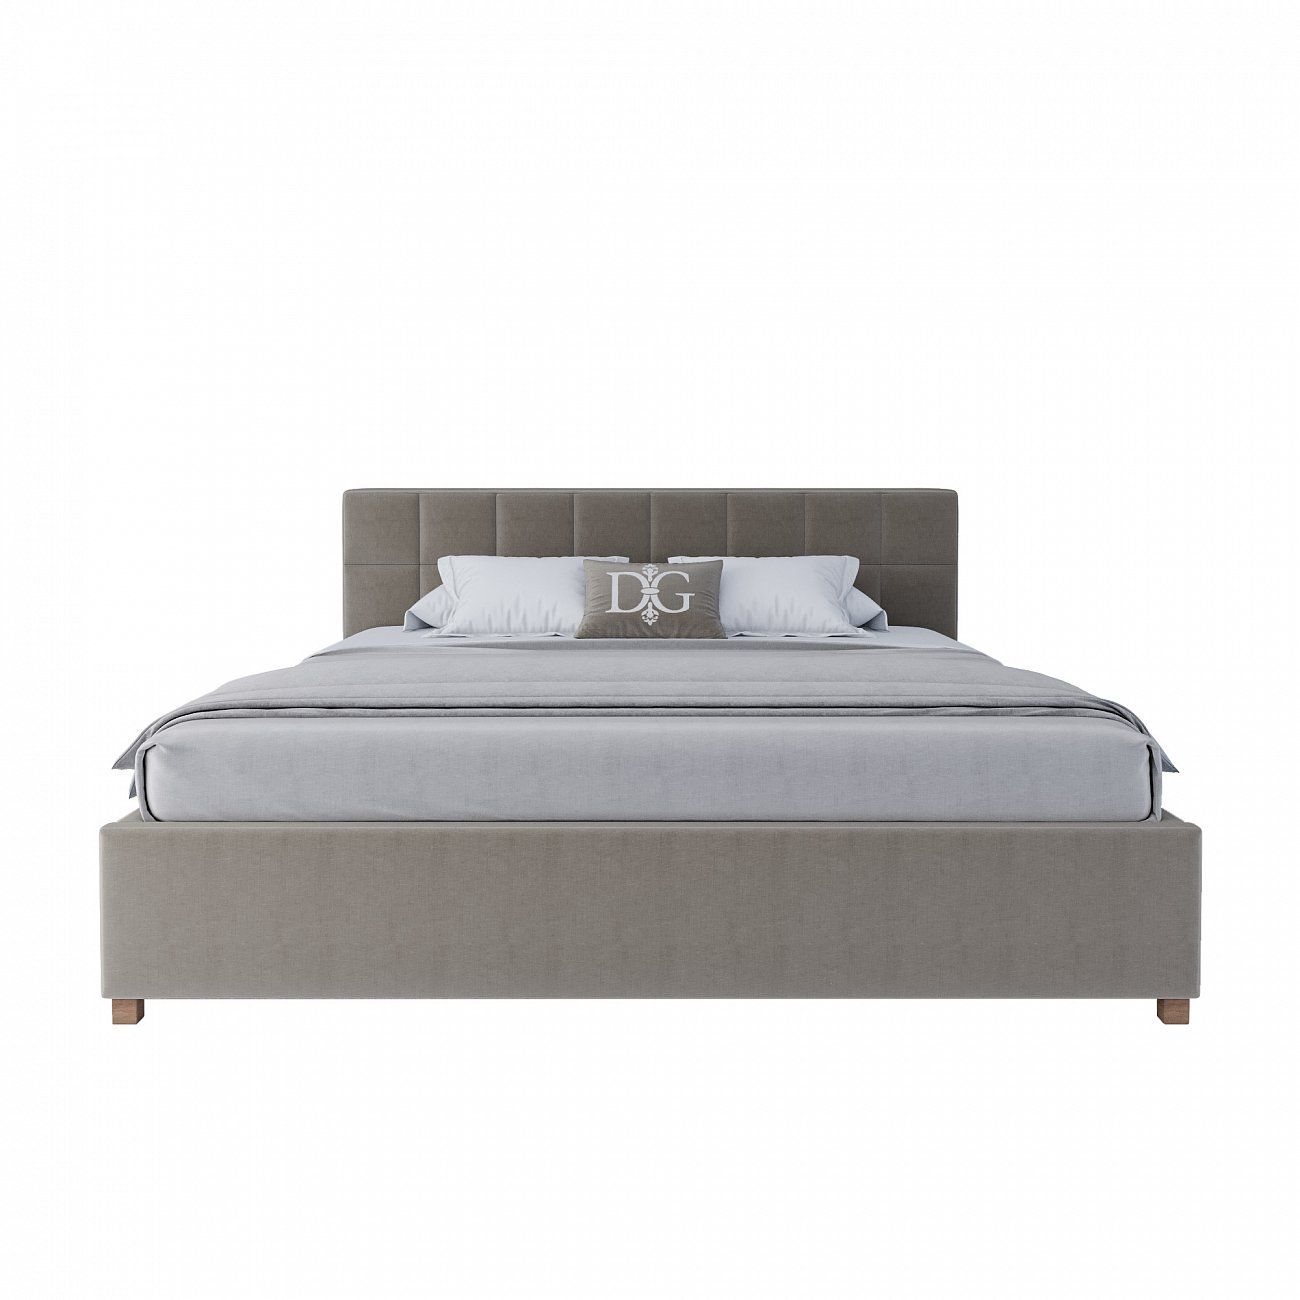 Double bed with upholstered headboard 180x200 cm grey Wales